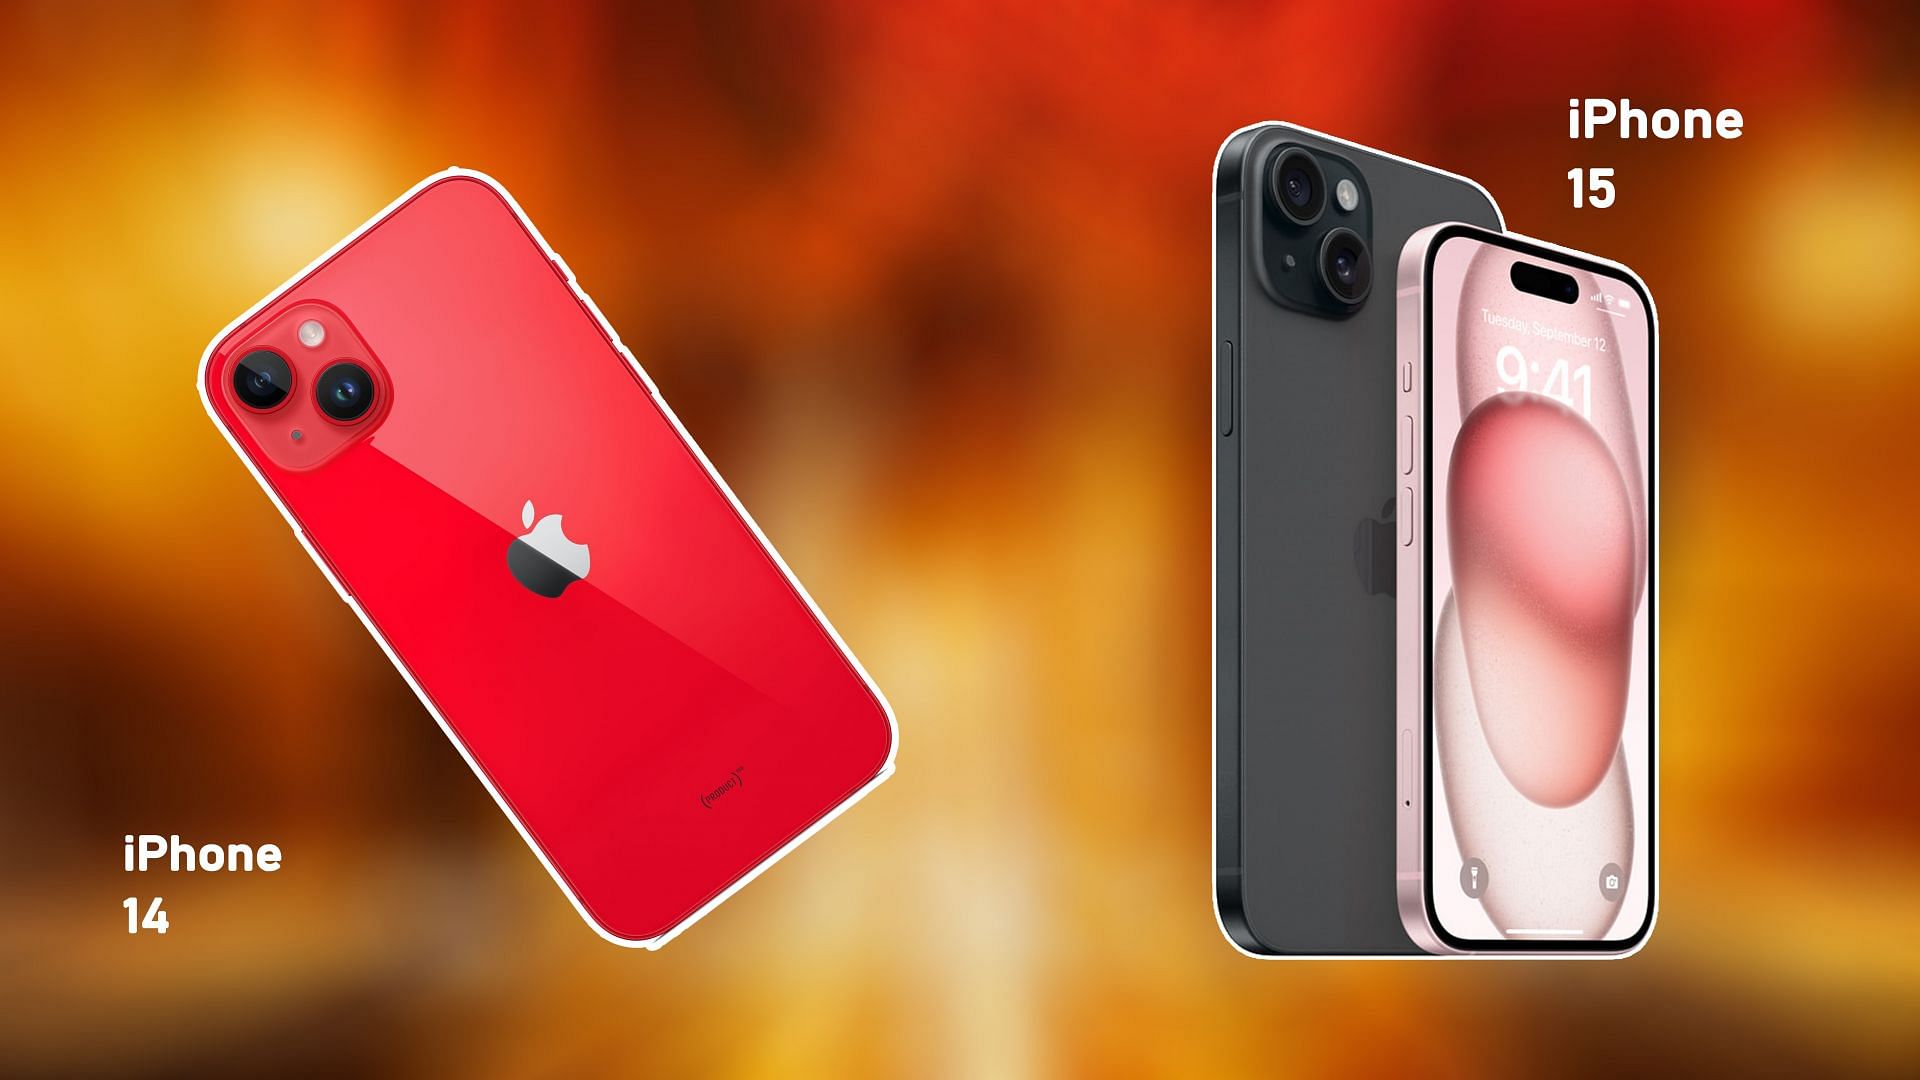 All differences between the iPhone 14 and the iPhone 15 (Image via Sportskeeda)